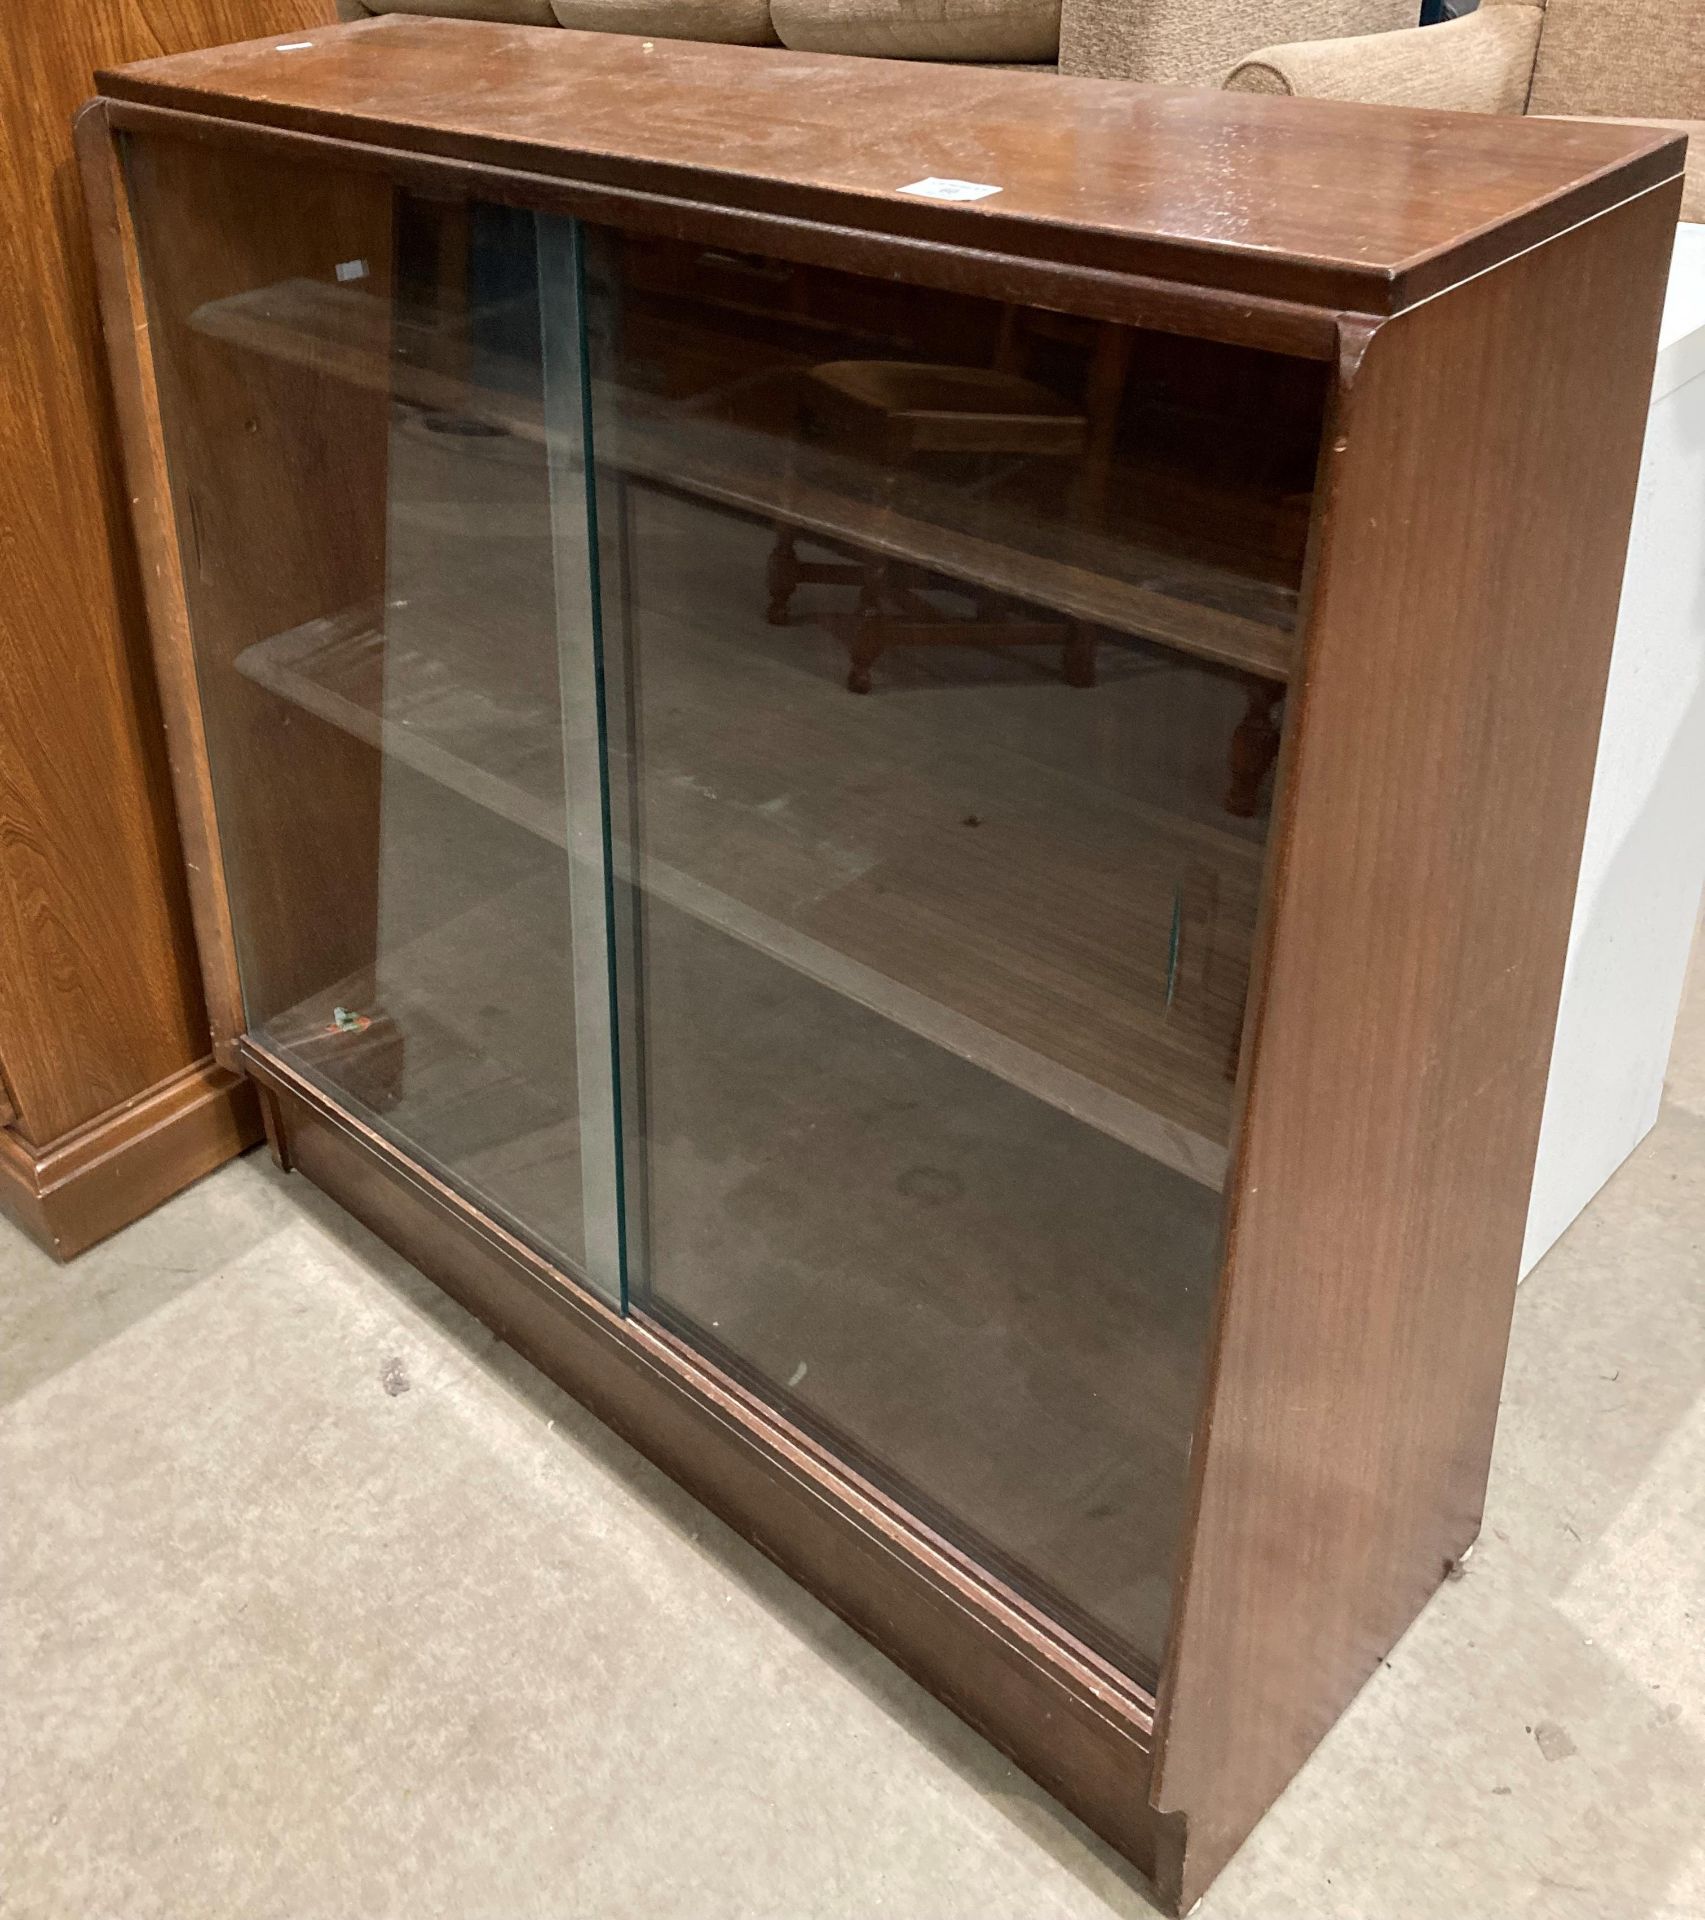 An oak three shelf bookcase with glass sliding doors, - Image 2 of 2